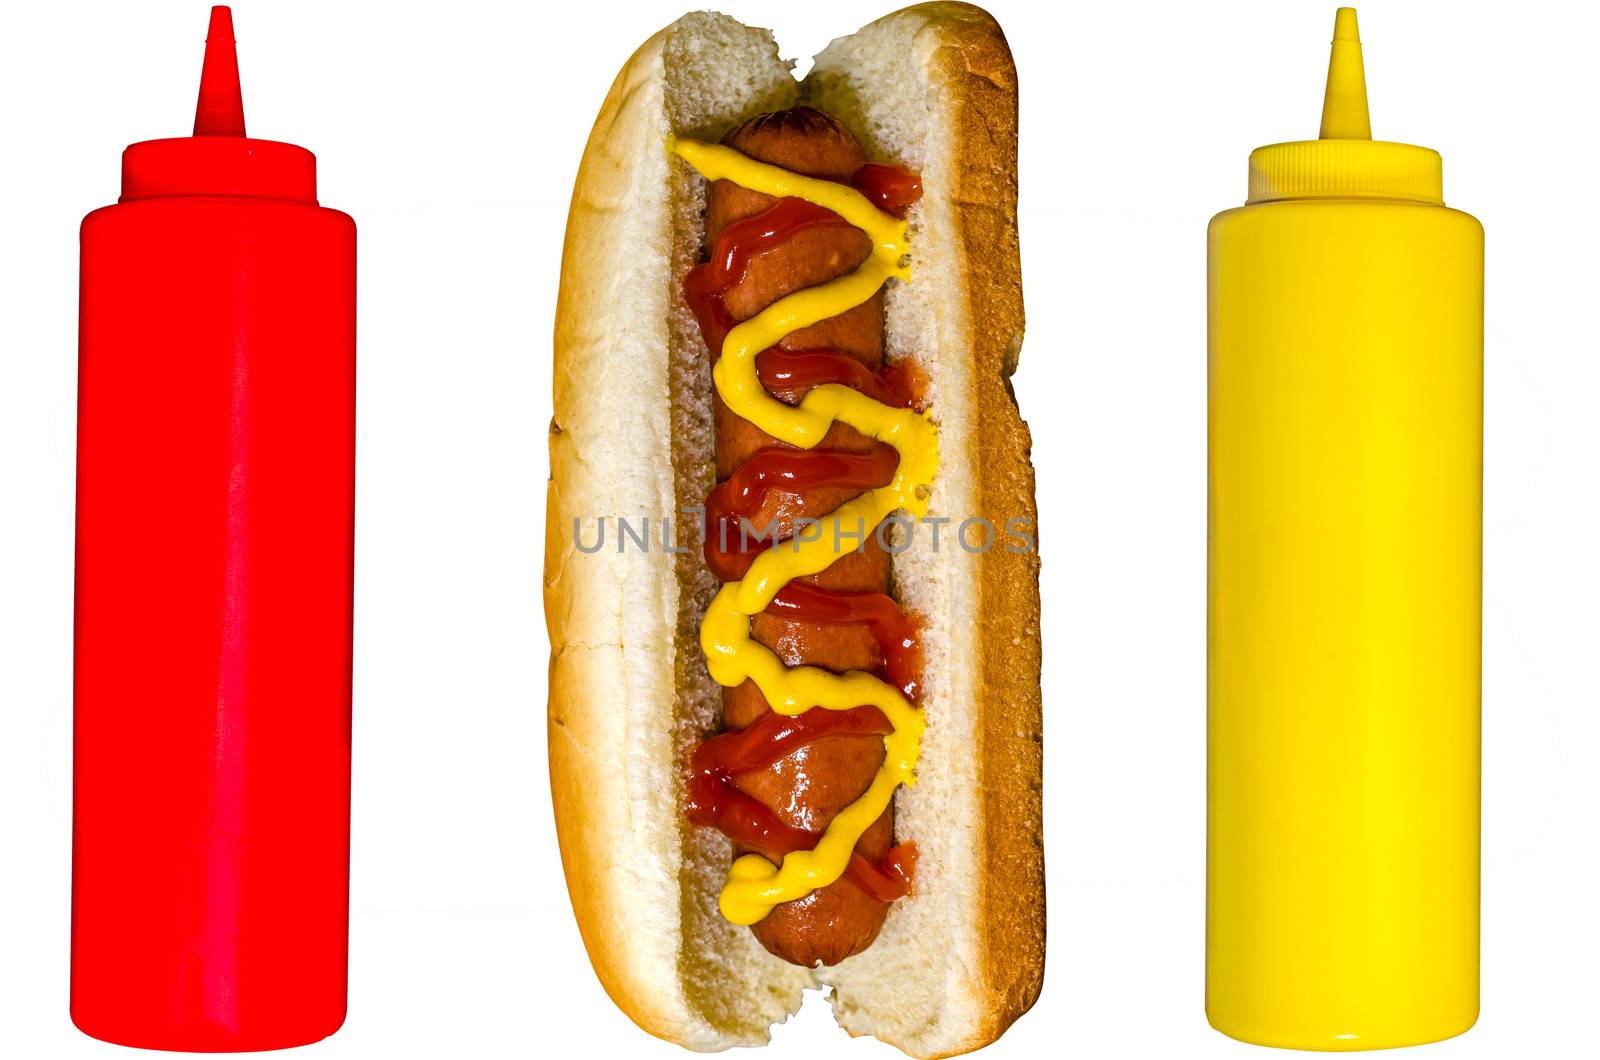 Hot dog with ketchup and mustard bottles isolated on white background.